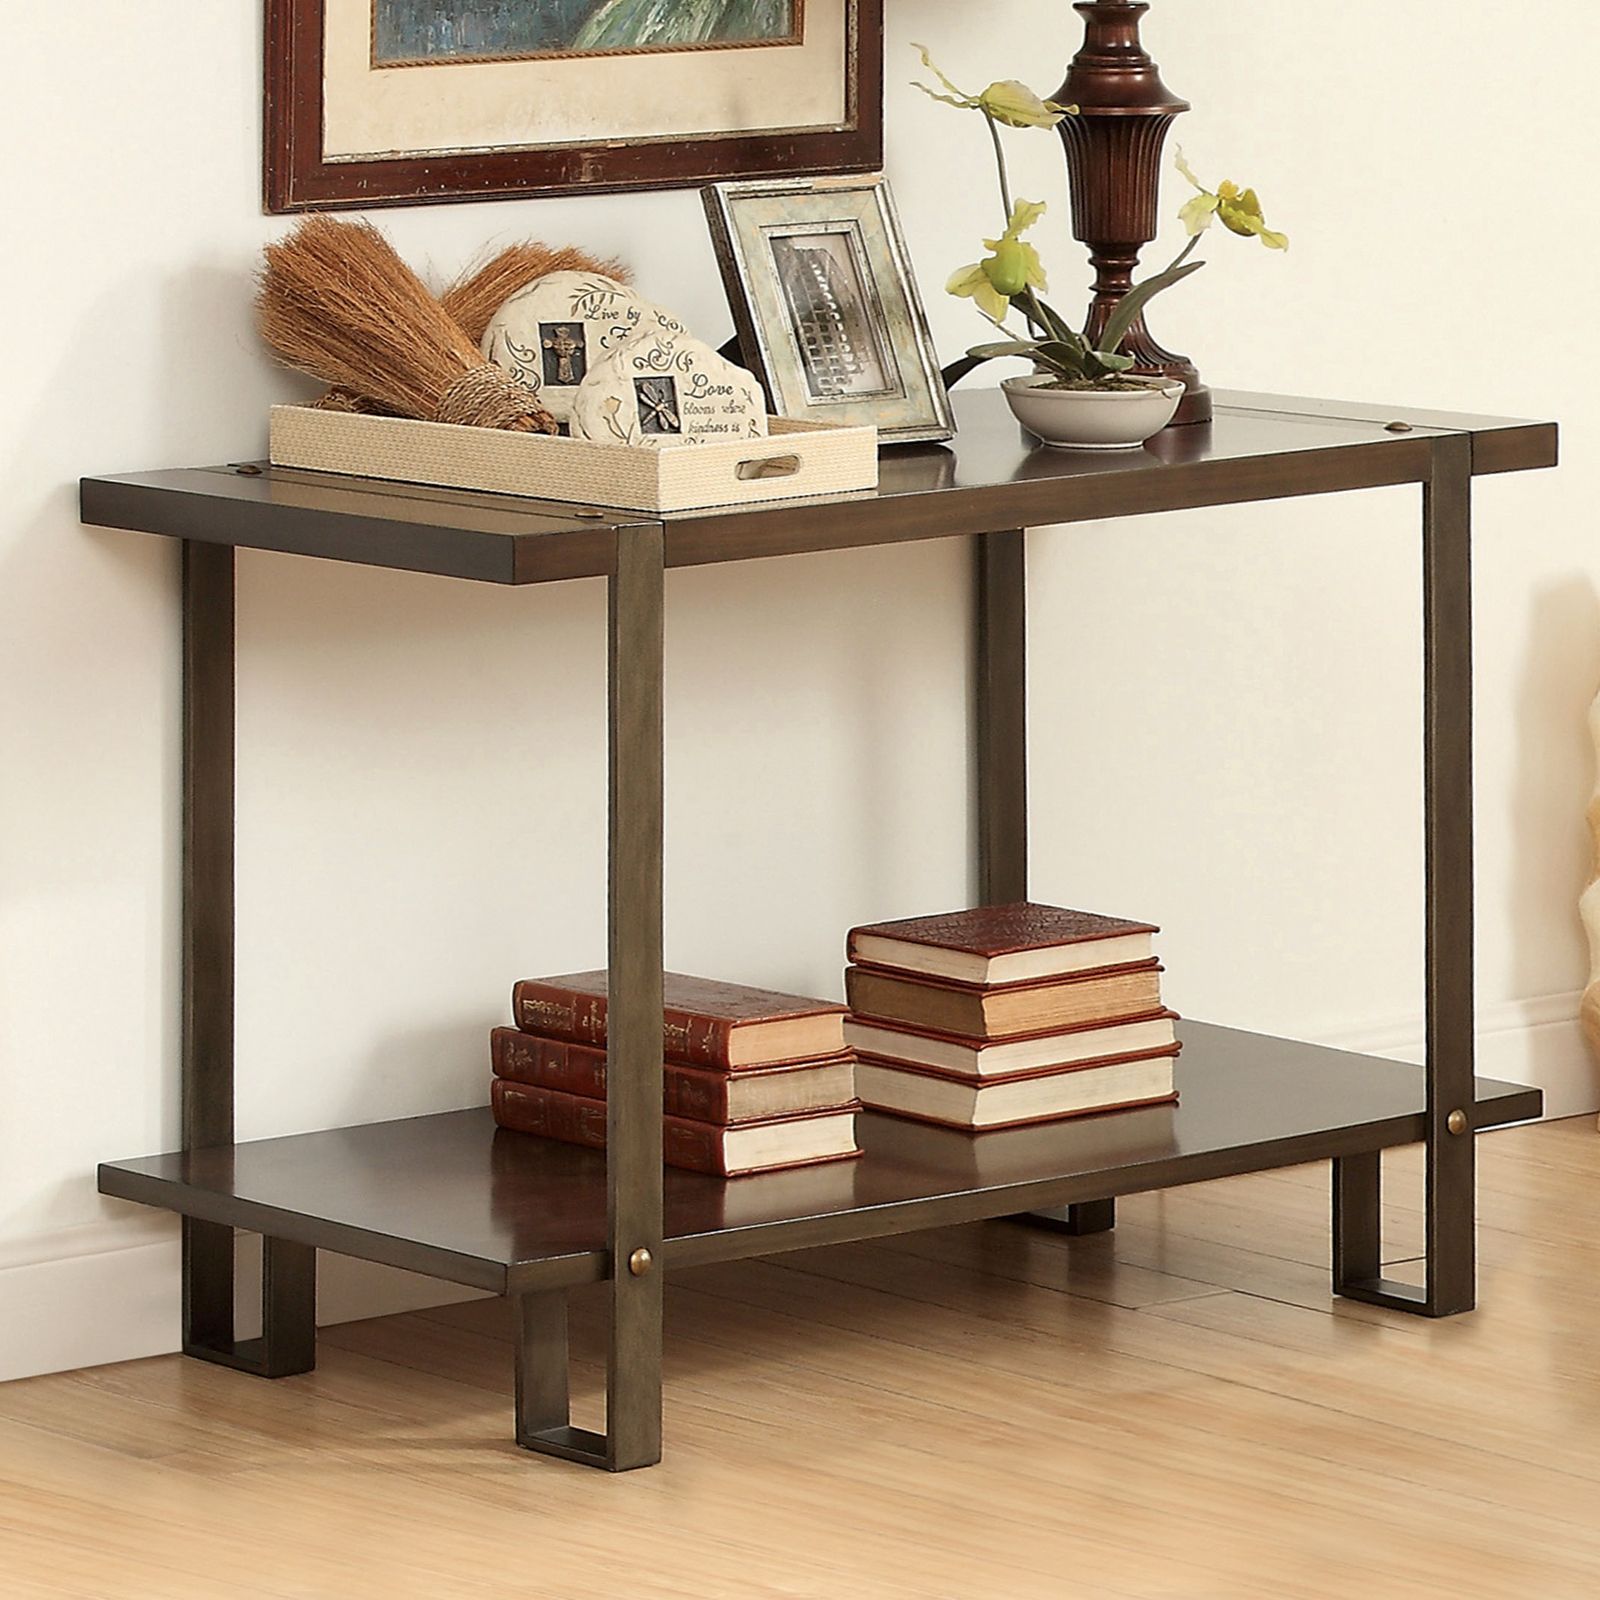 Furniture Of America Rustic Rectangular Sofa Table – Dark Inside Rustic Oak And Black Console Tables (View 3 of 20)